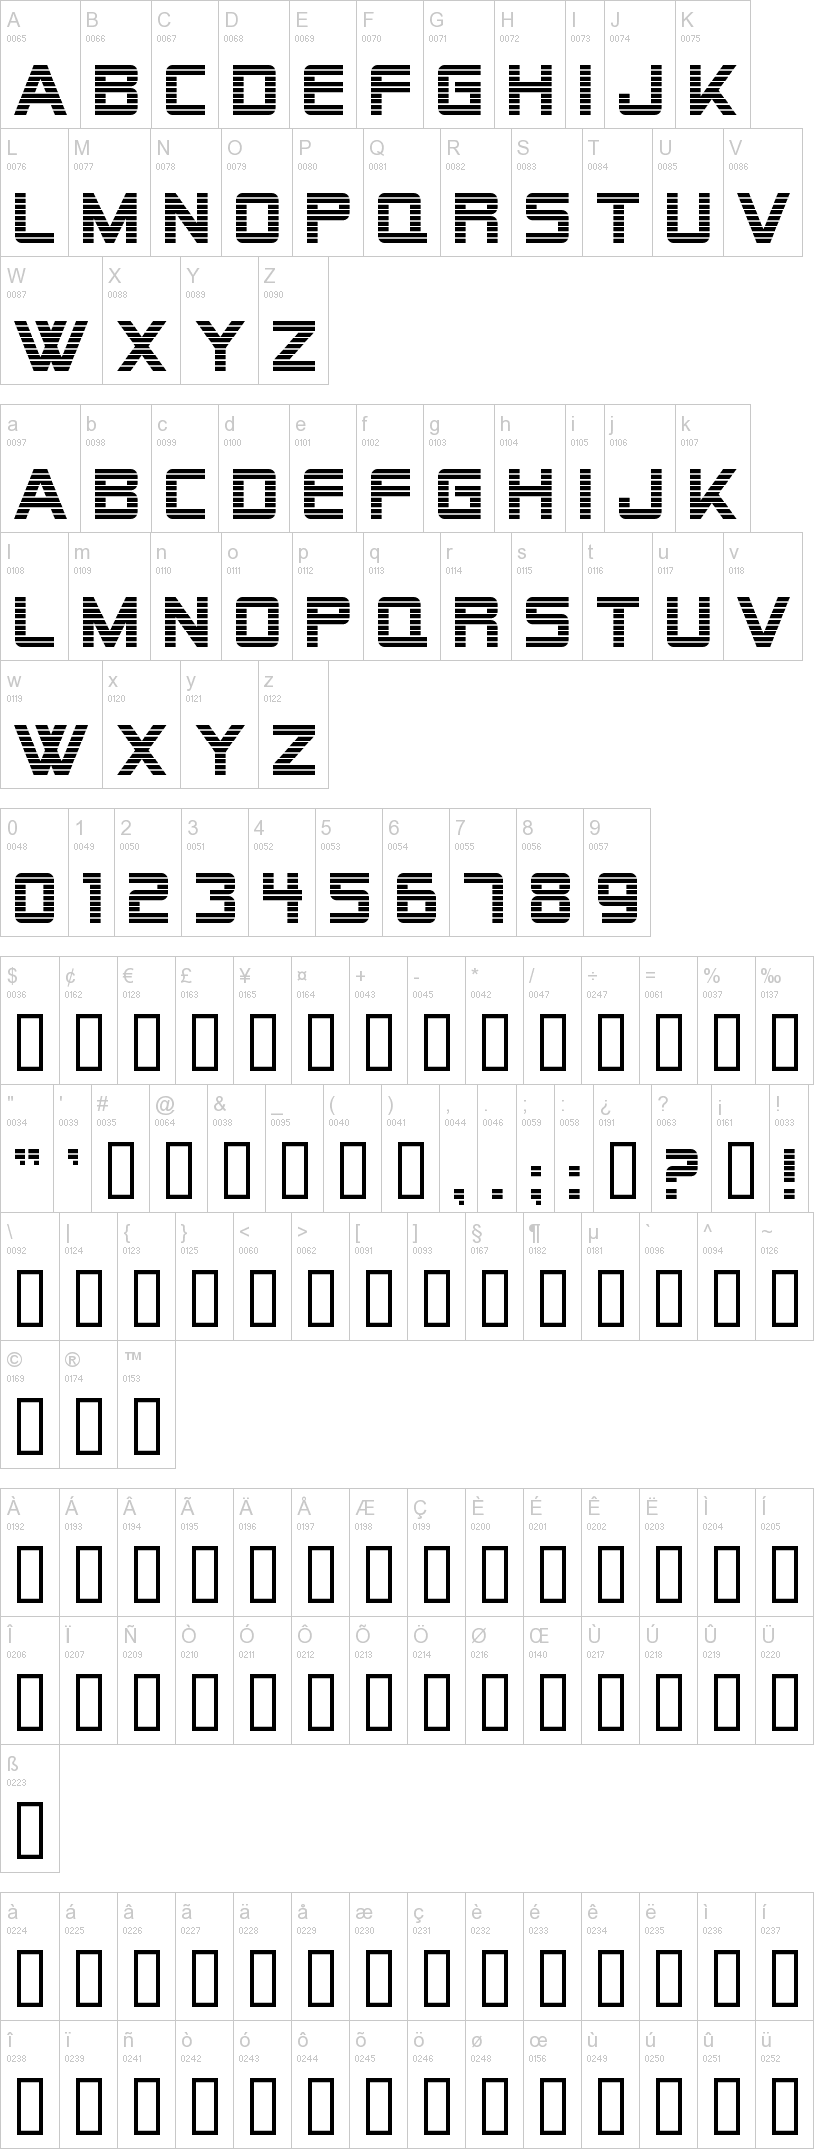 computer font numbers